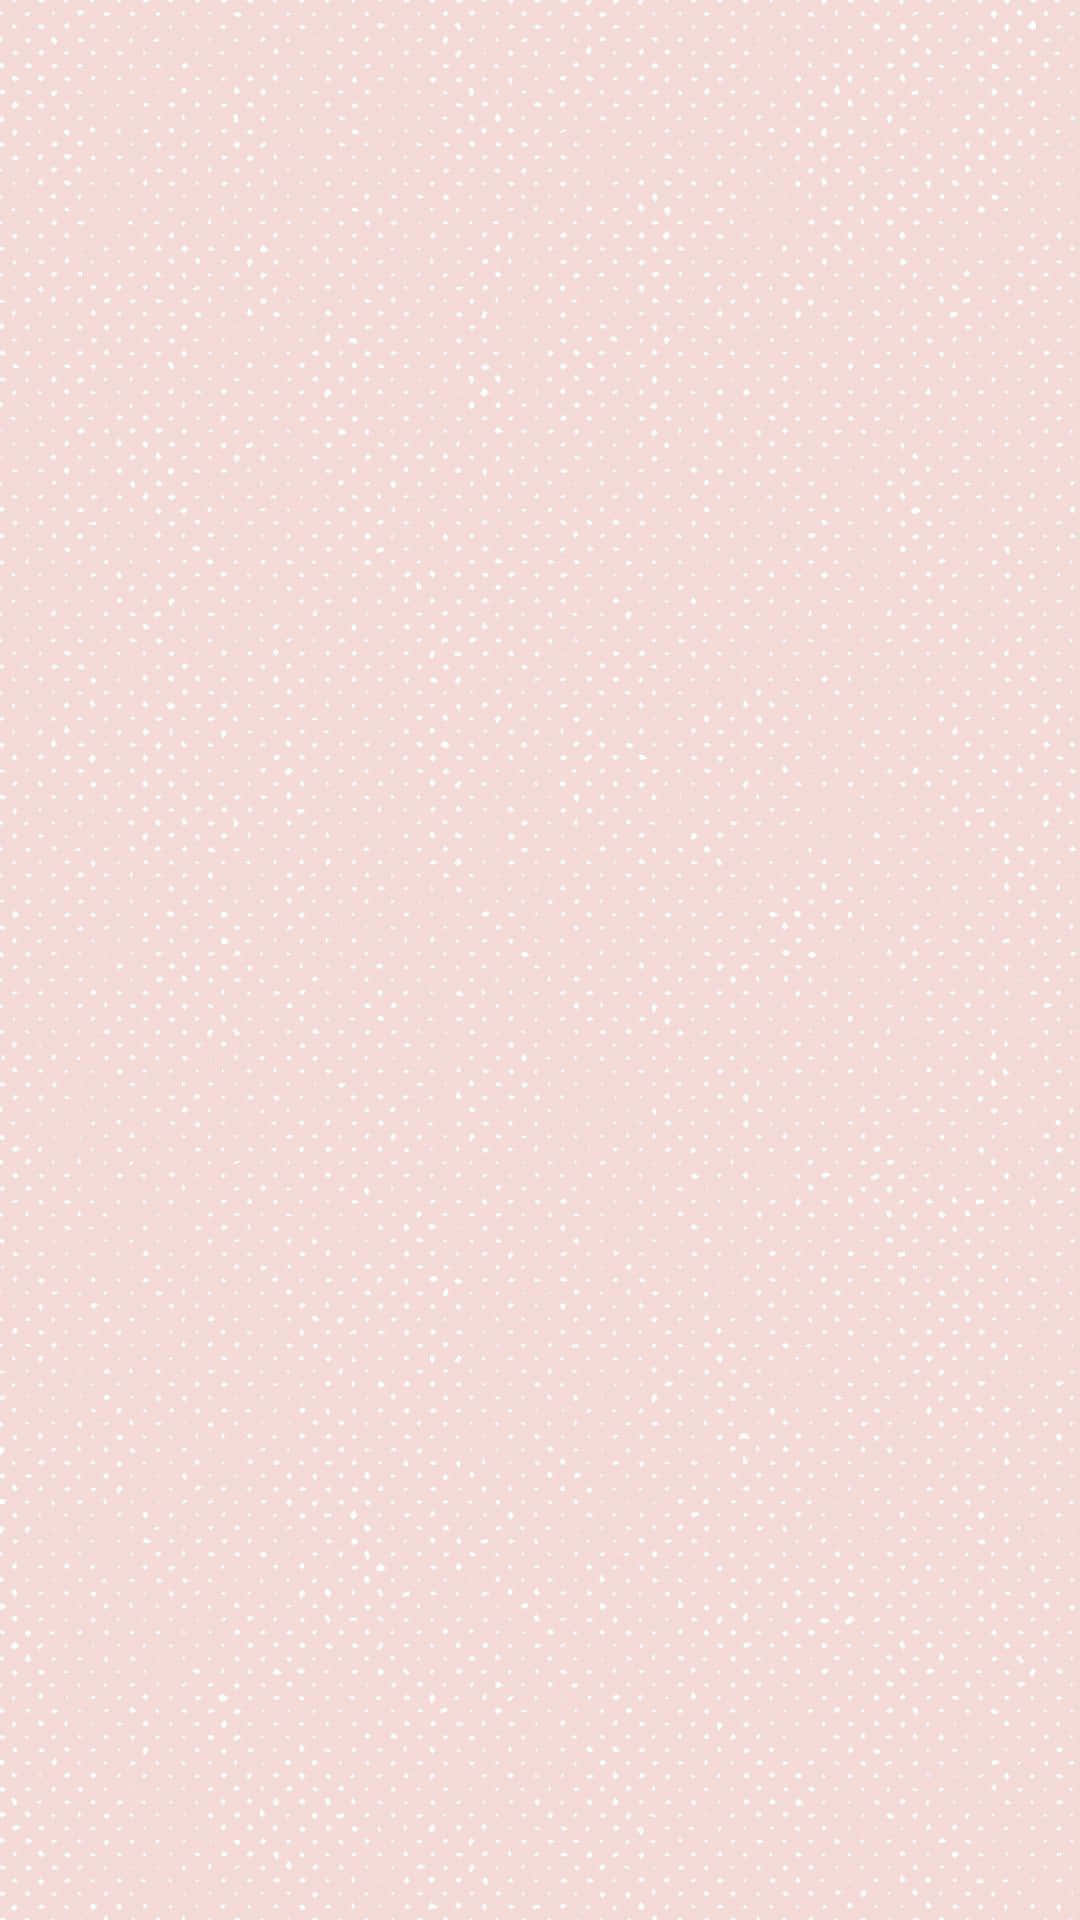 Soft and Sweet | Pastel Peach Aesthetic Wallpaper